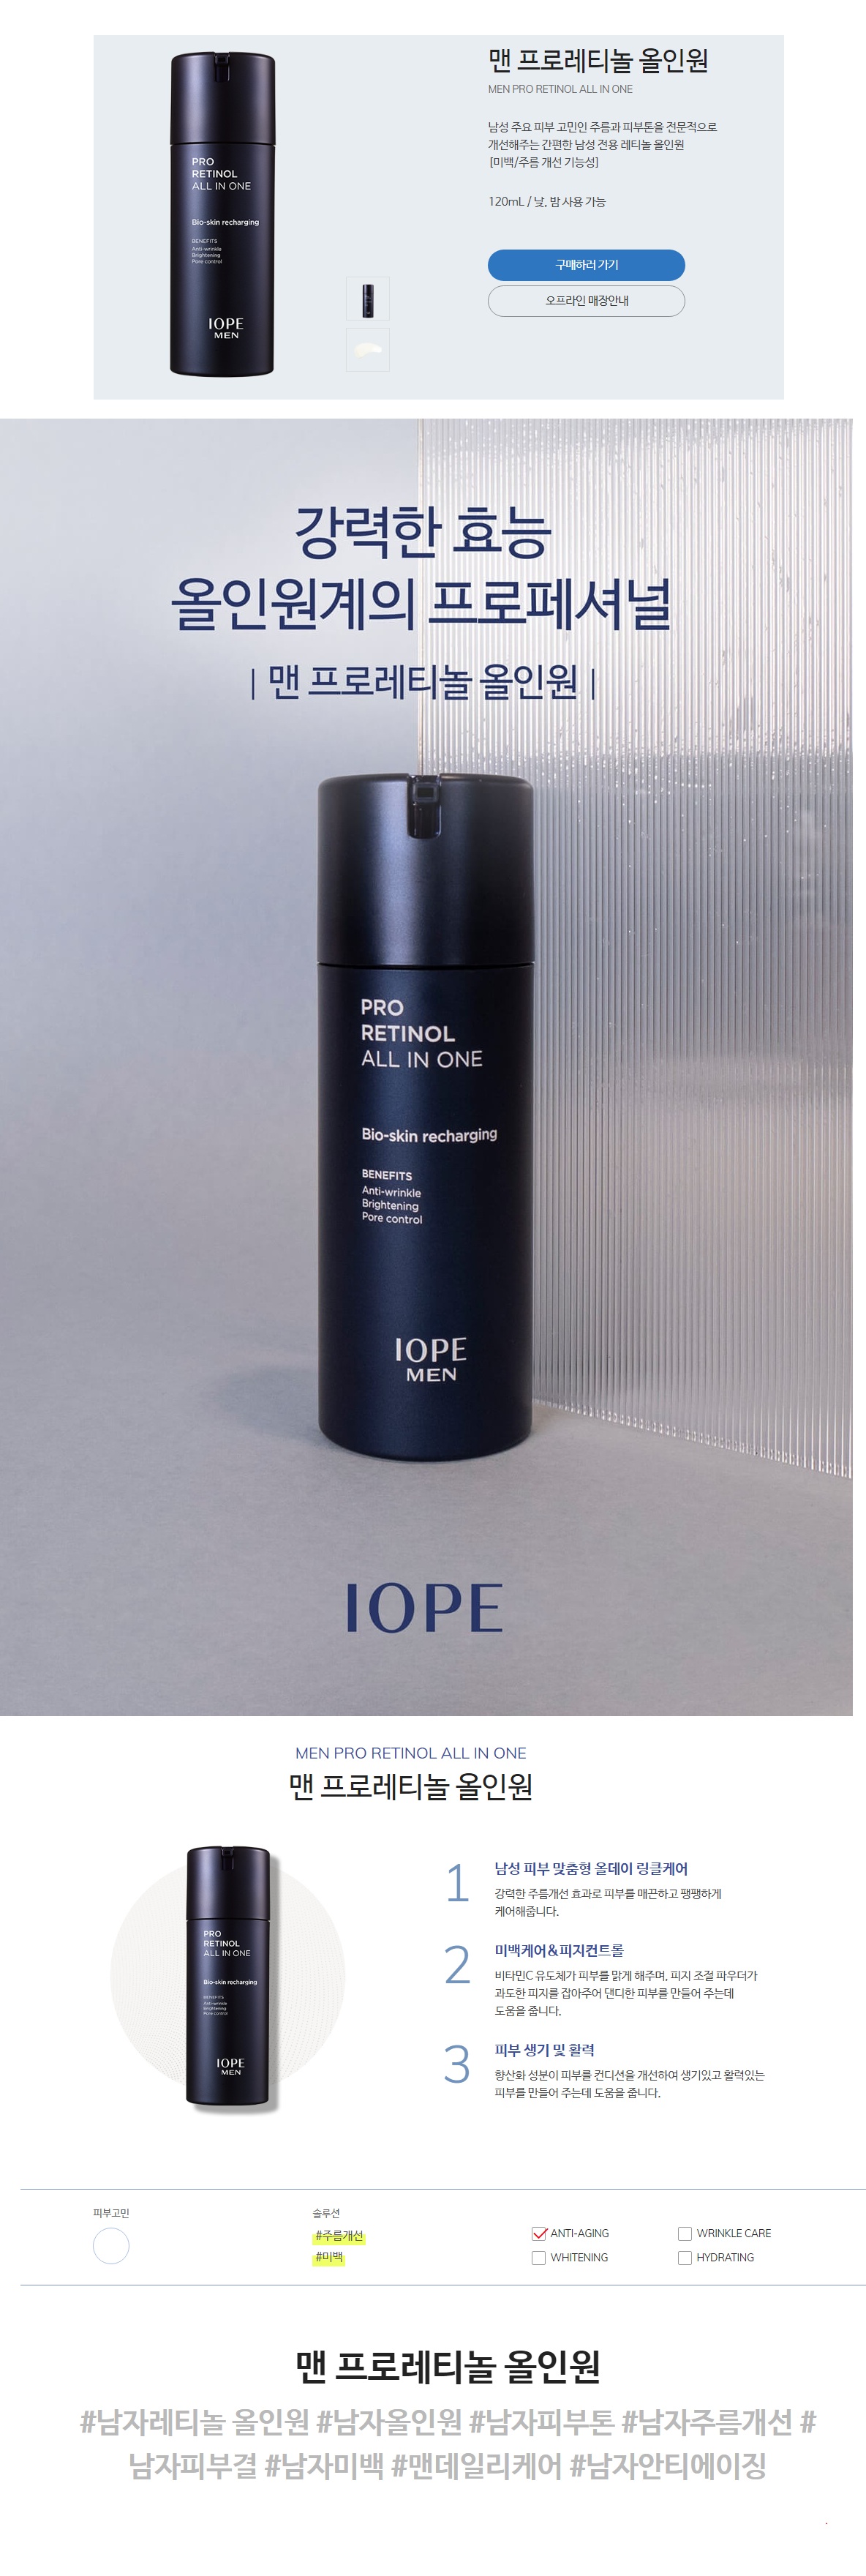 IOPE Men Pro Retinol All In One koream men skincare product online shop malaysia China italy